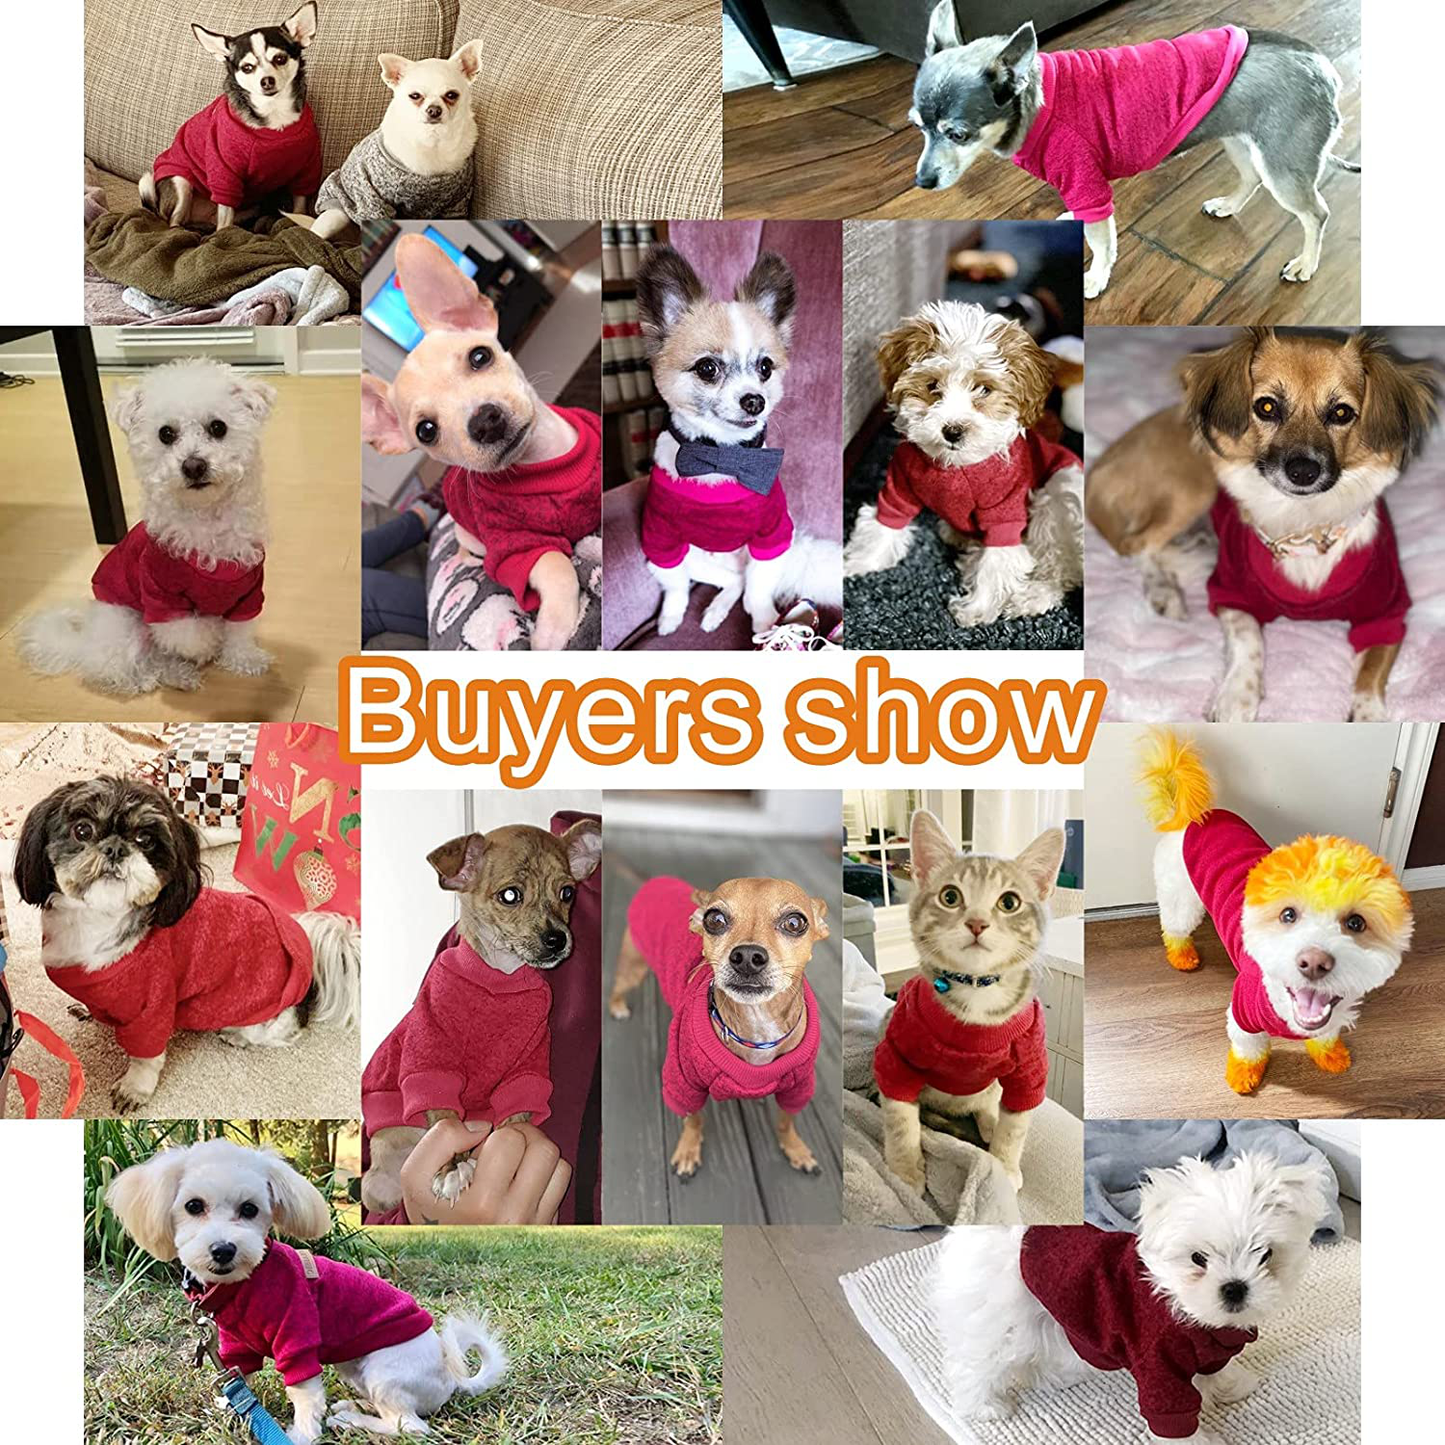 Jecikelon Pet Dog Clothes Knitwear Dog Sweater Soft Thickening Warm Pup Dogs Shirt Winter Puppy Sweater for Dogs (Medium, Wine)